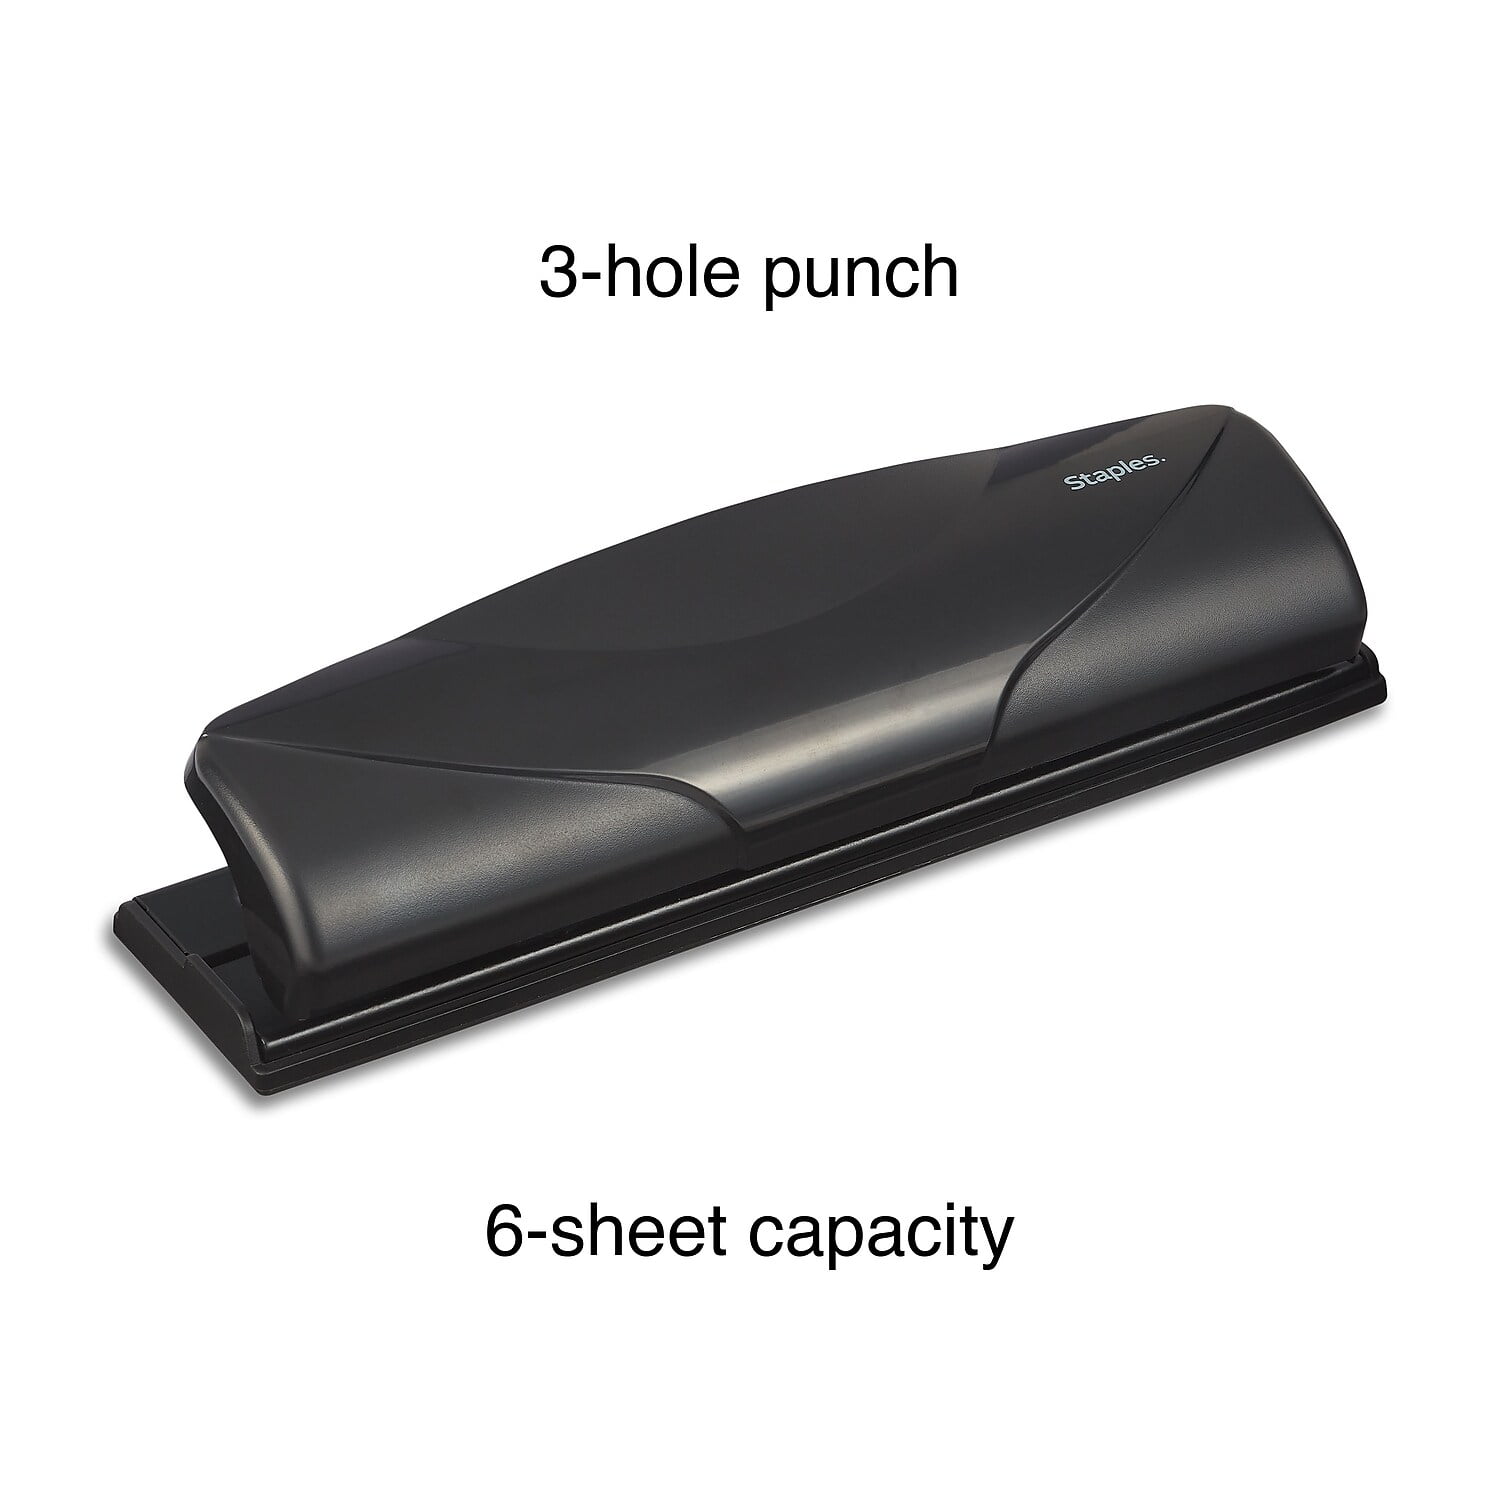 TYH Supplies Box of 100 Mini Half Page Economy 7 Hole Punch Small Clea